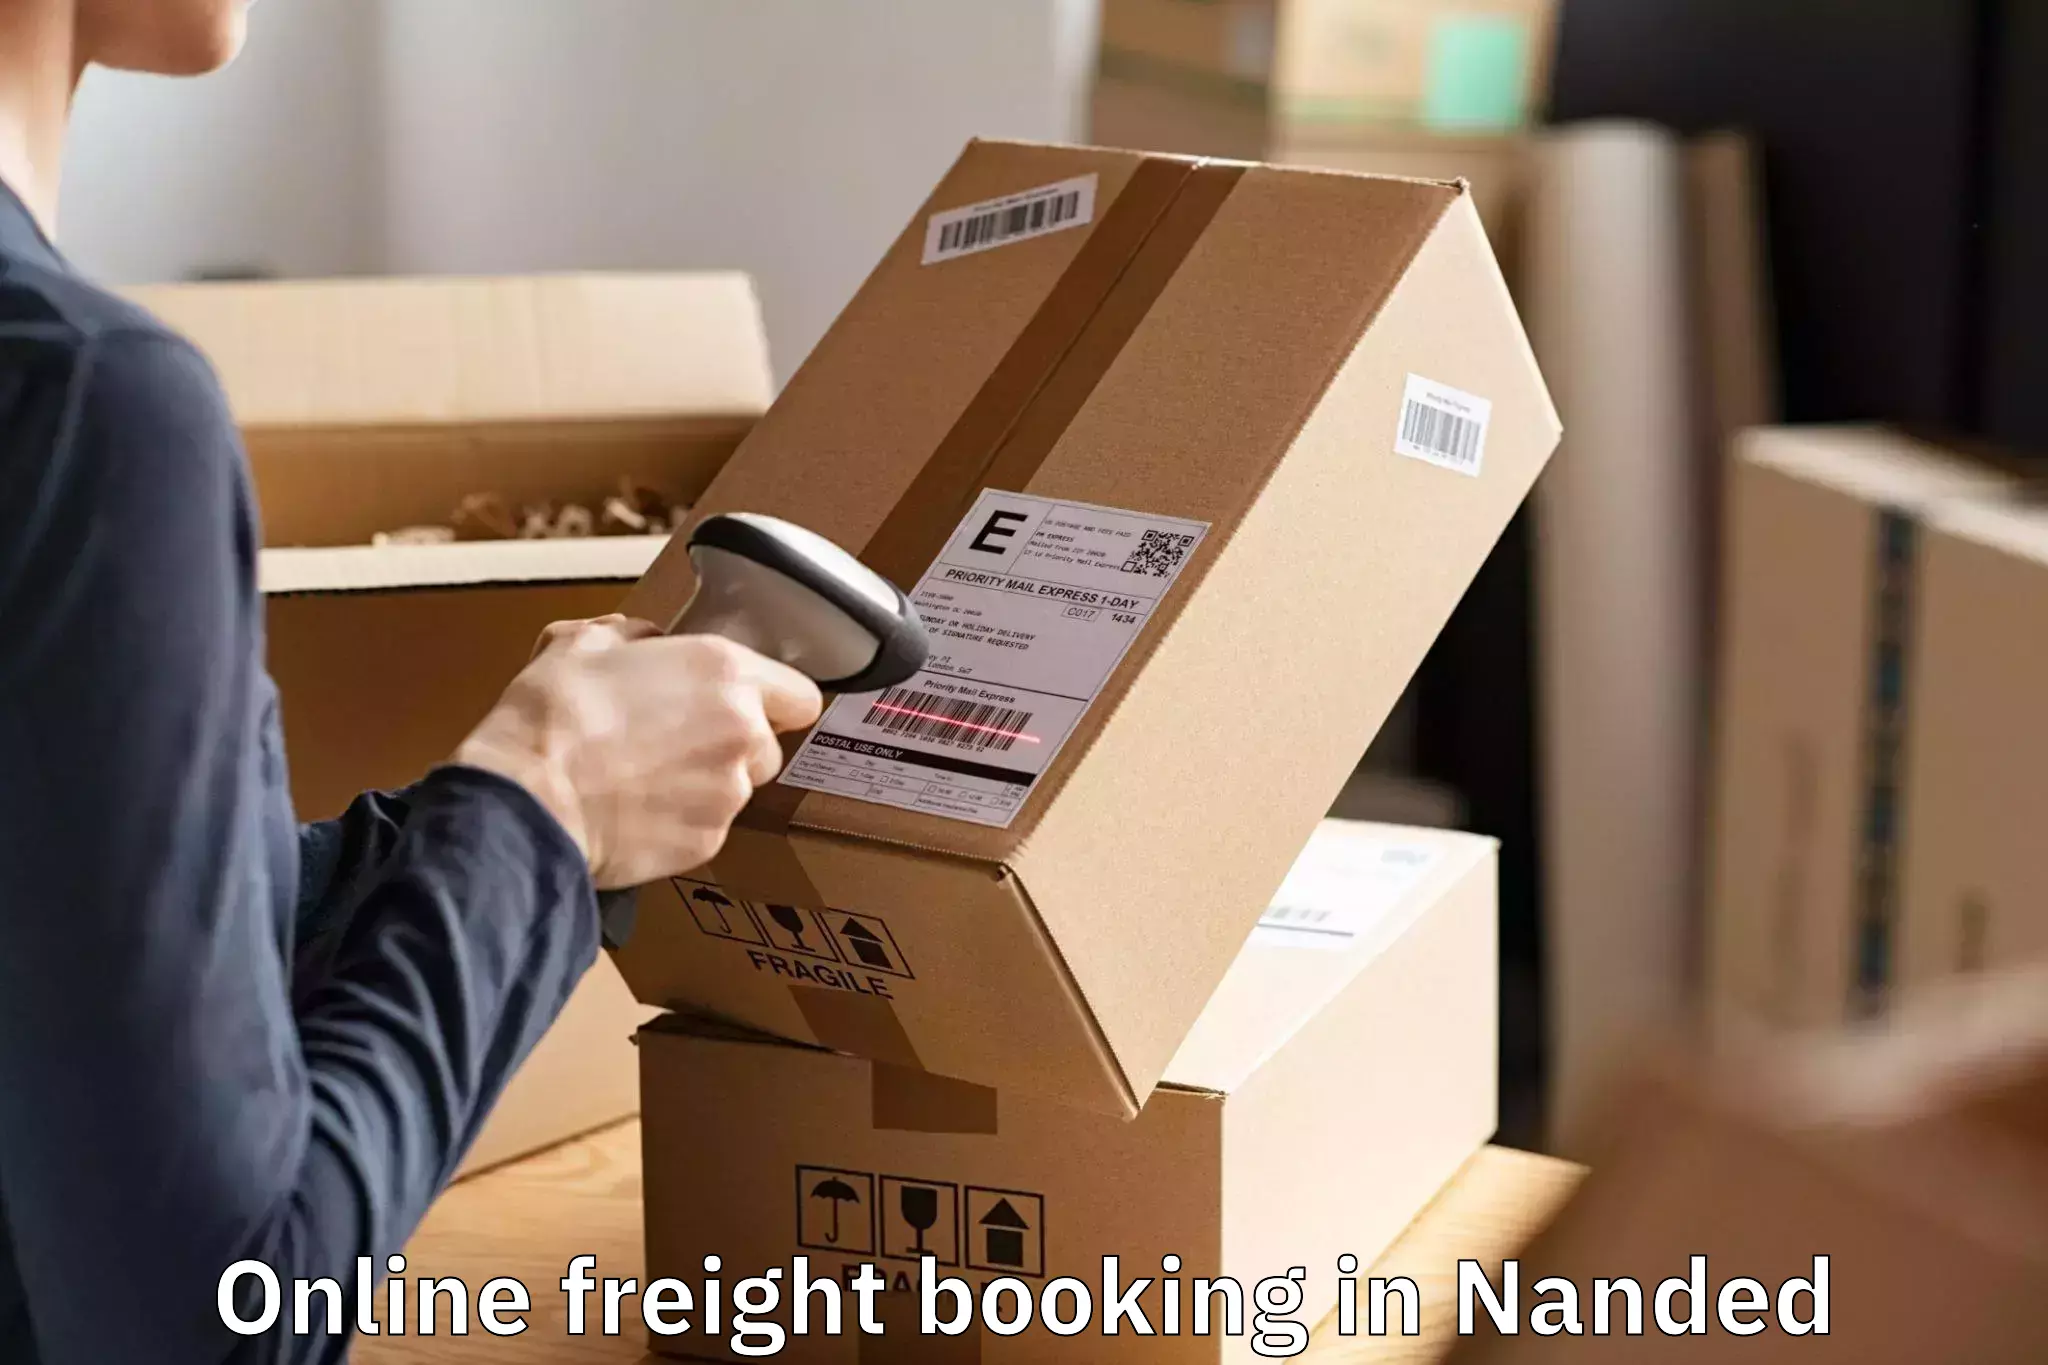 Comprehensive Online Freight Booking in Nanded, Maharashtra (MH)